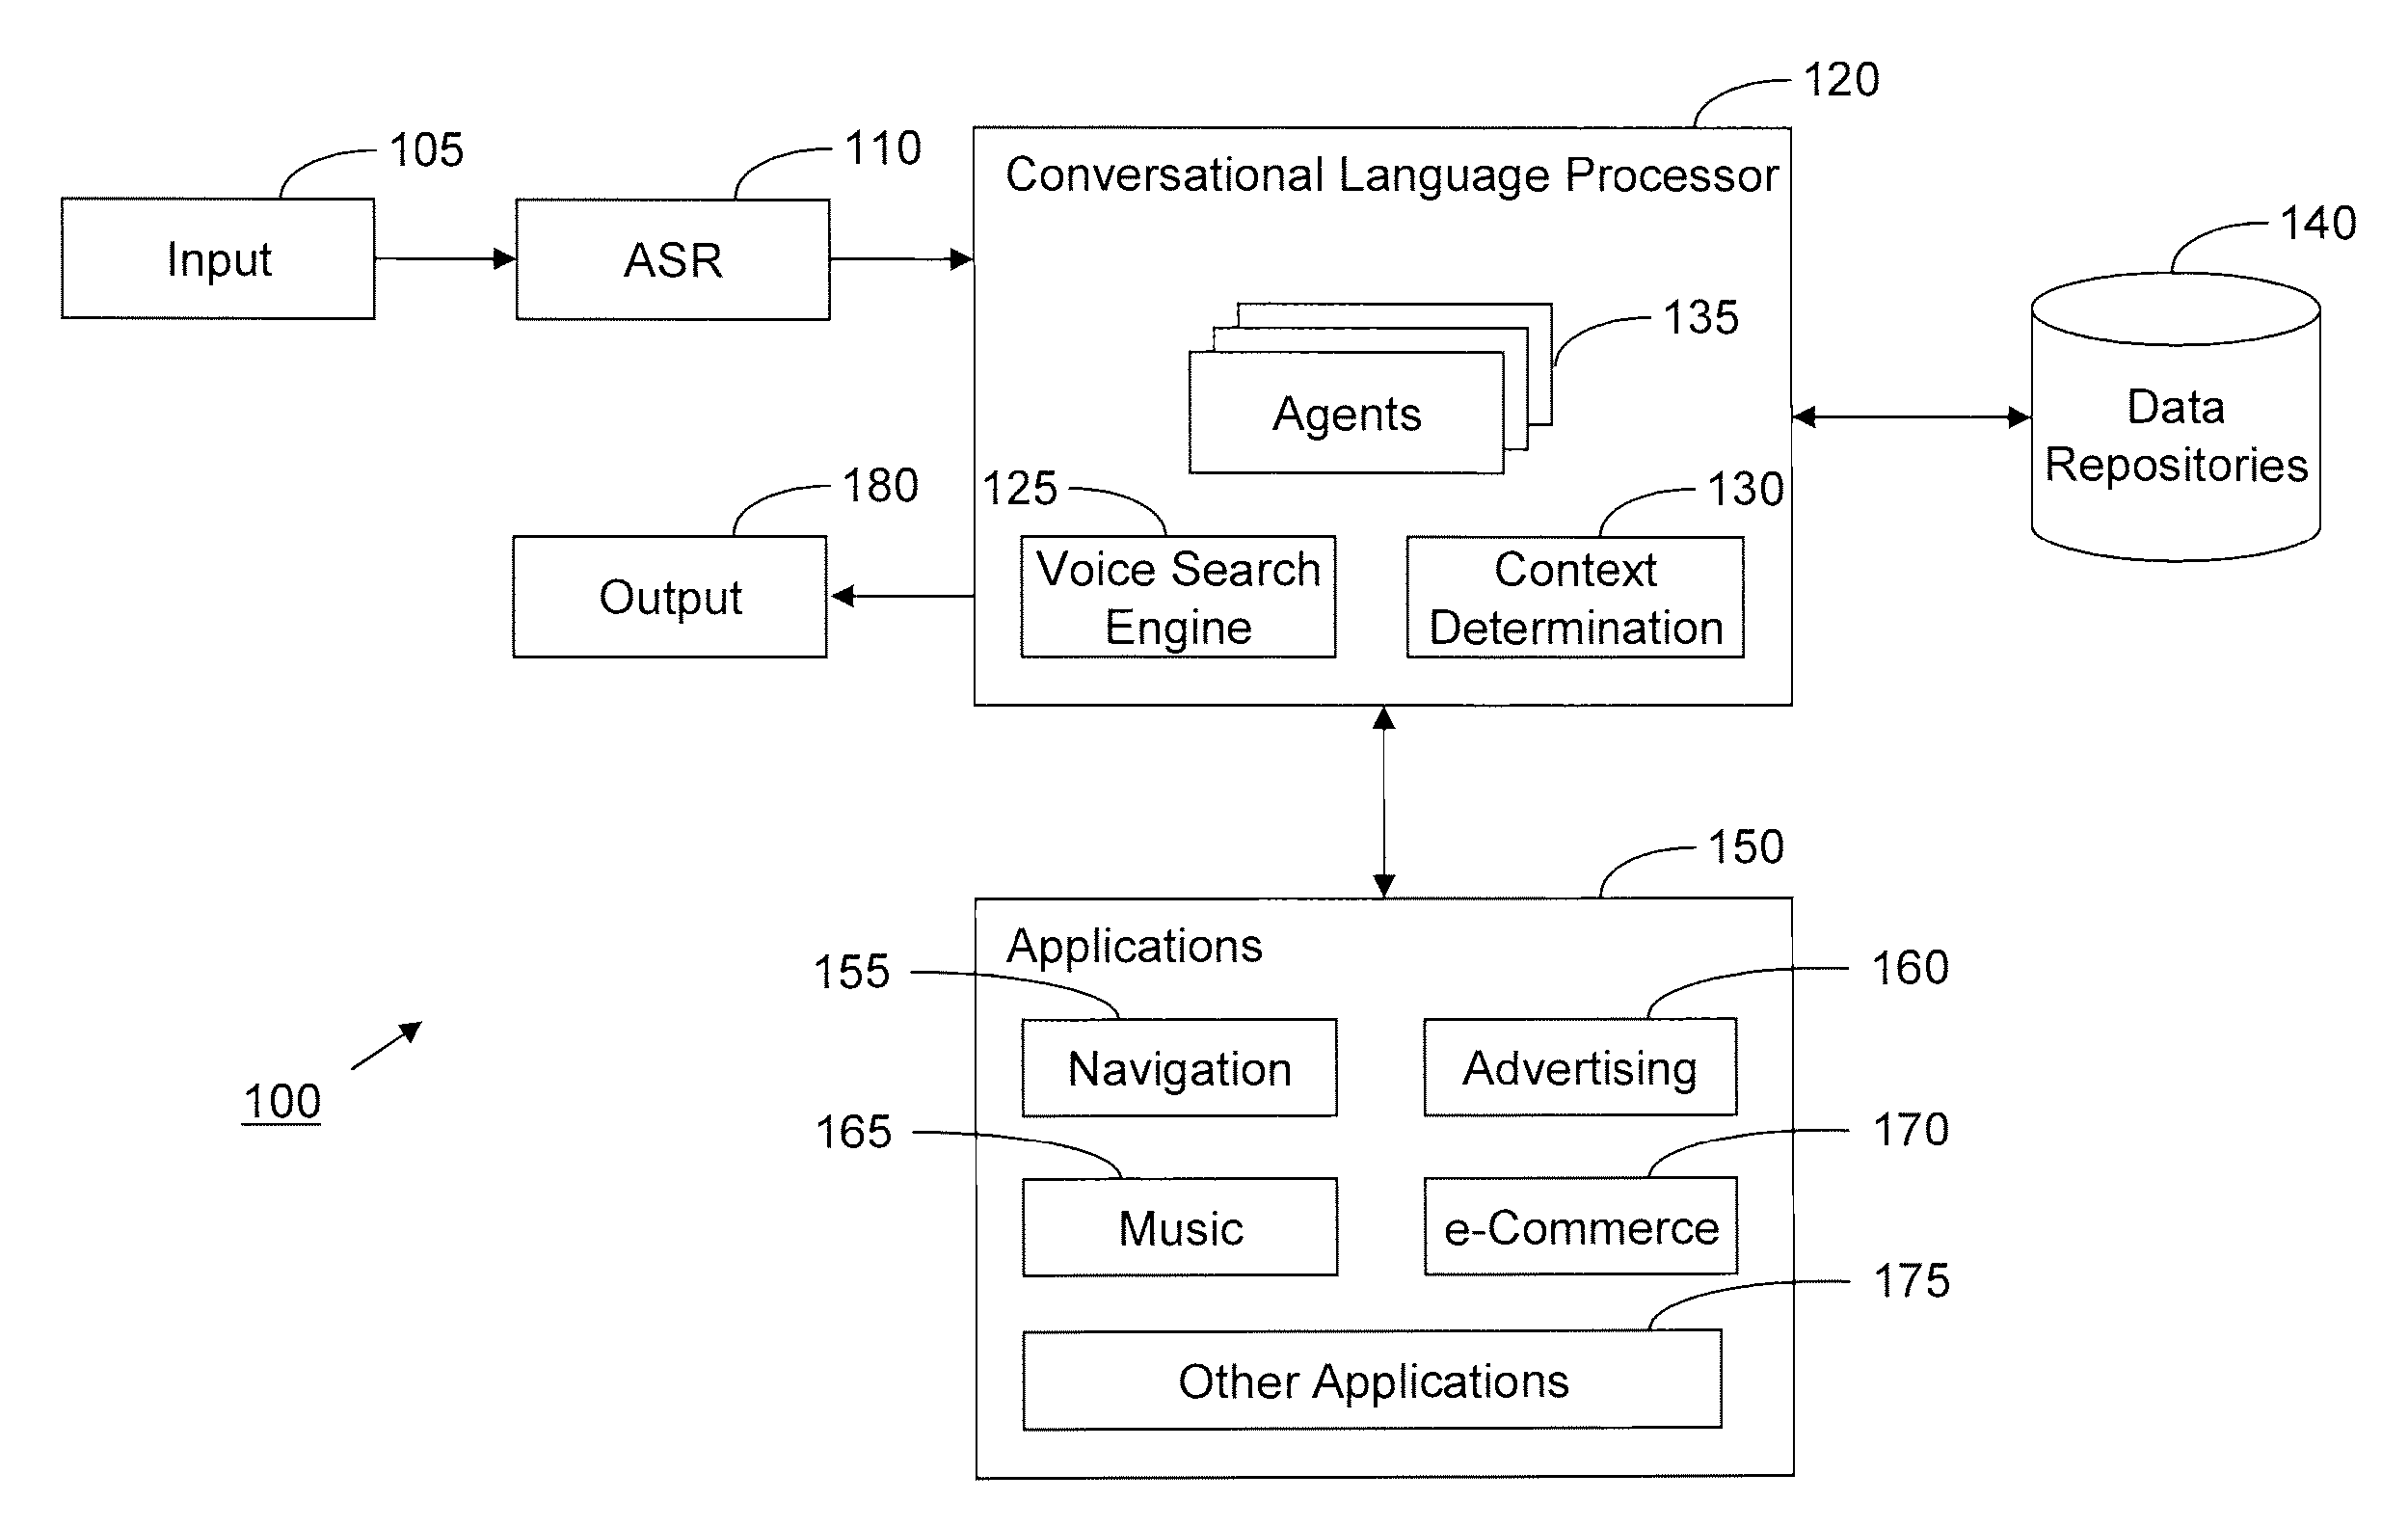 System and method for selecting and presenting advertisements based on natural language processing of voice-based input